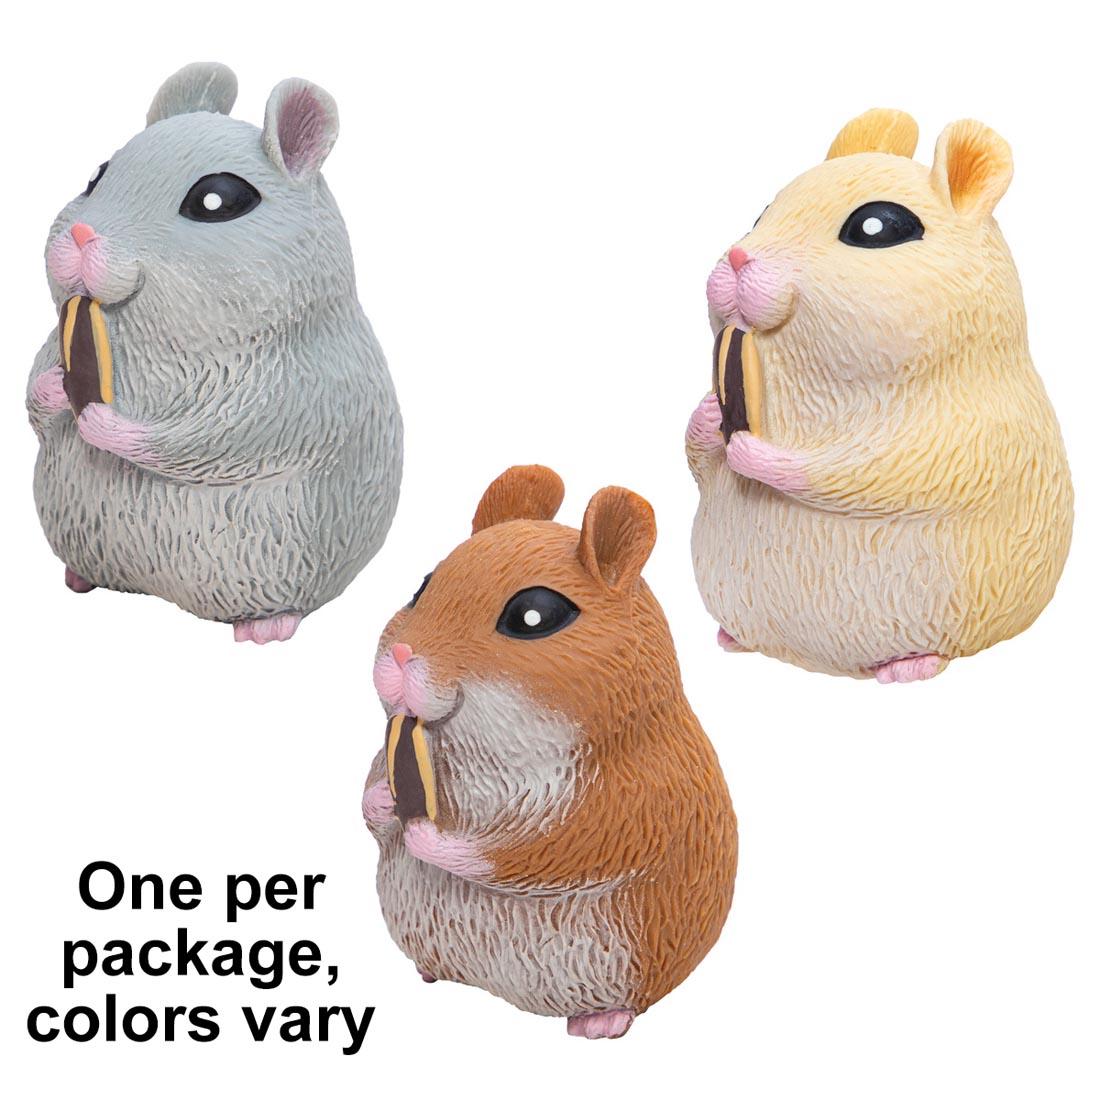 3 different Chonky Cheeks Hamster By Schylling Toys with the text One per package; colors vary